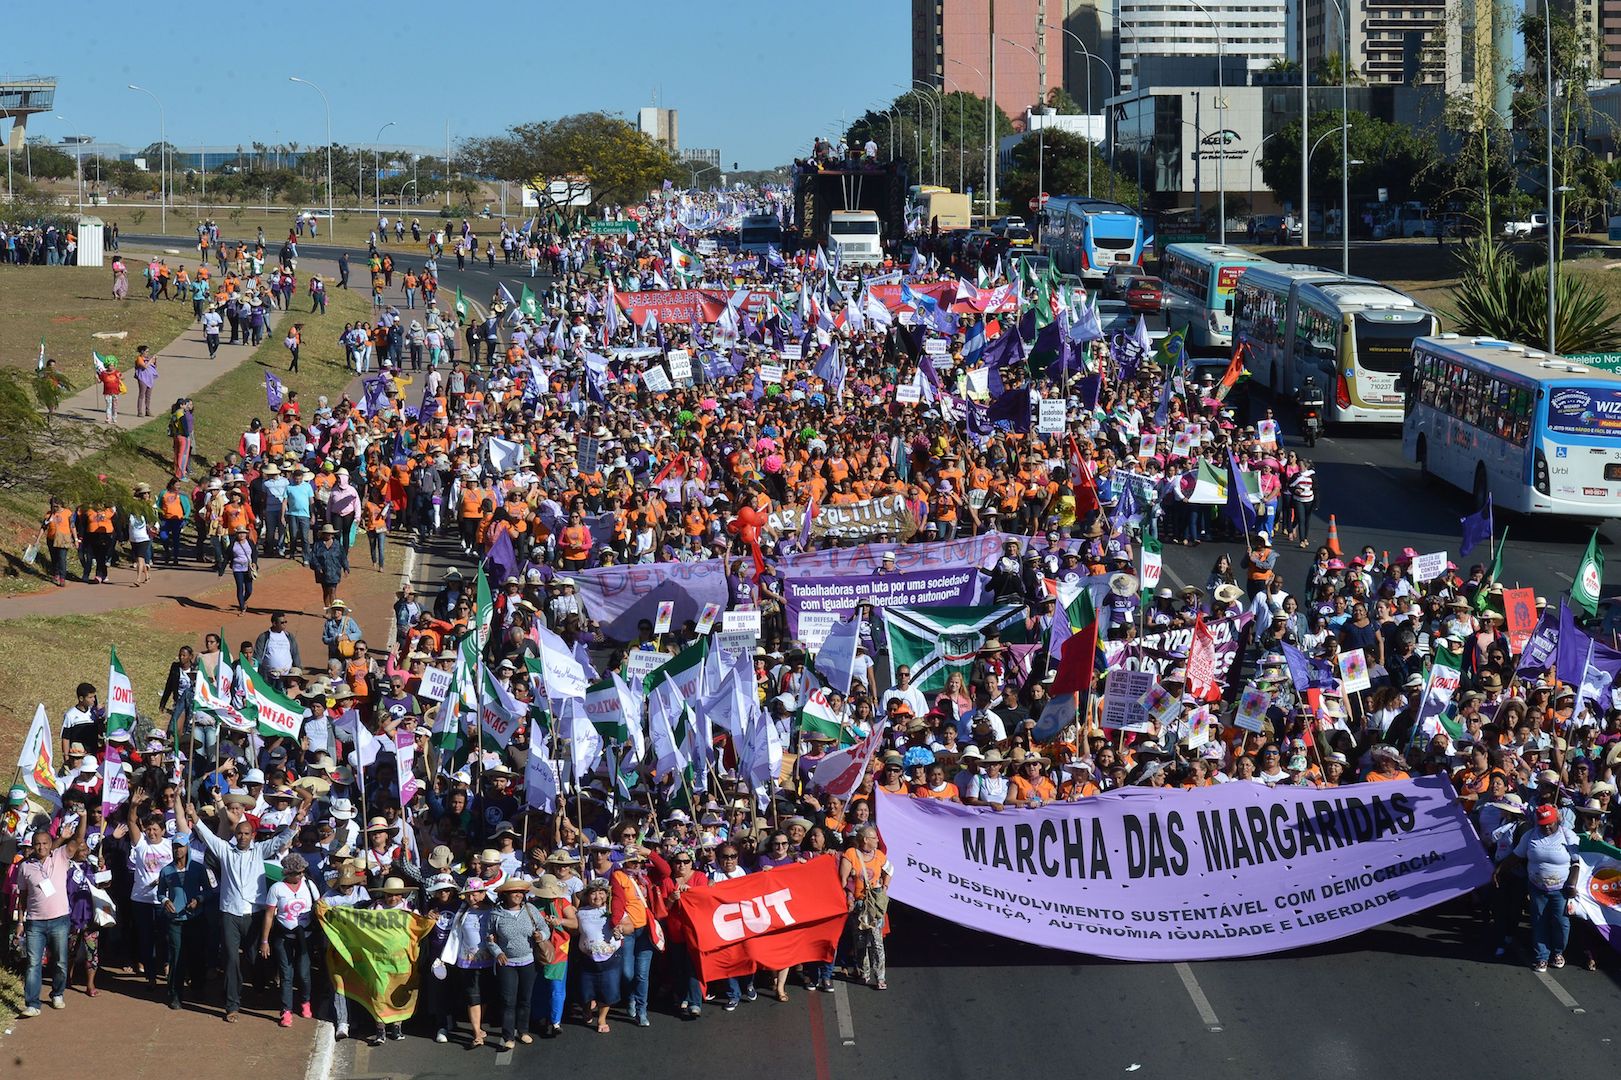 Brazil,The women's march, dubbed Marcha das Margaridas, is expected to bring hundreds of thousands to Brazil's capital, Brasilia this week.